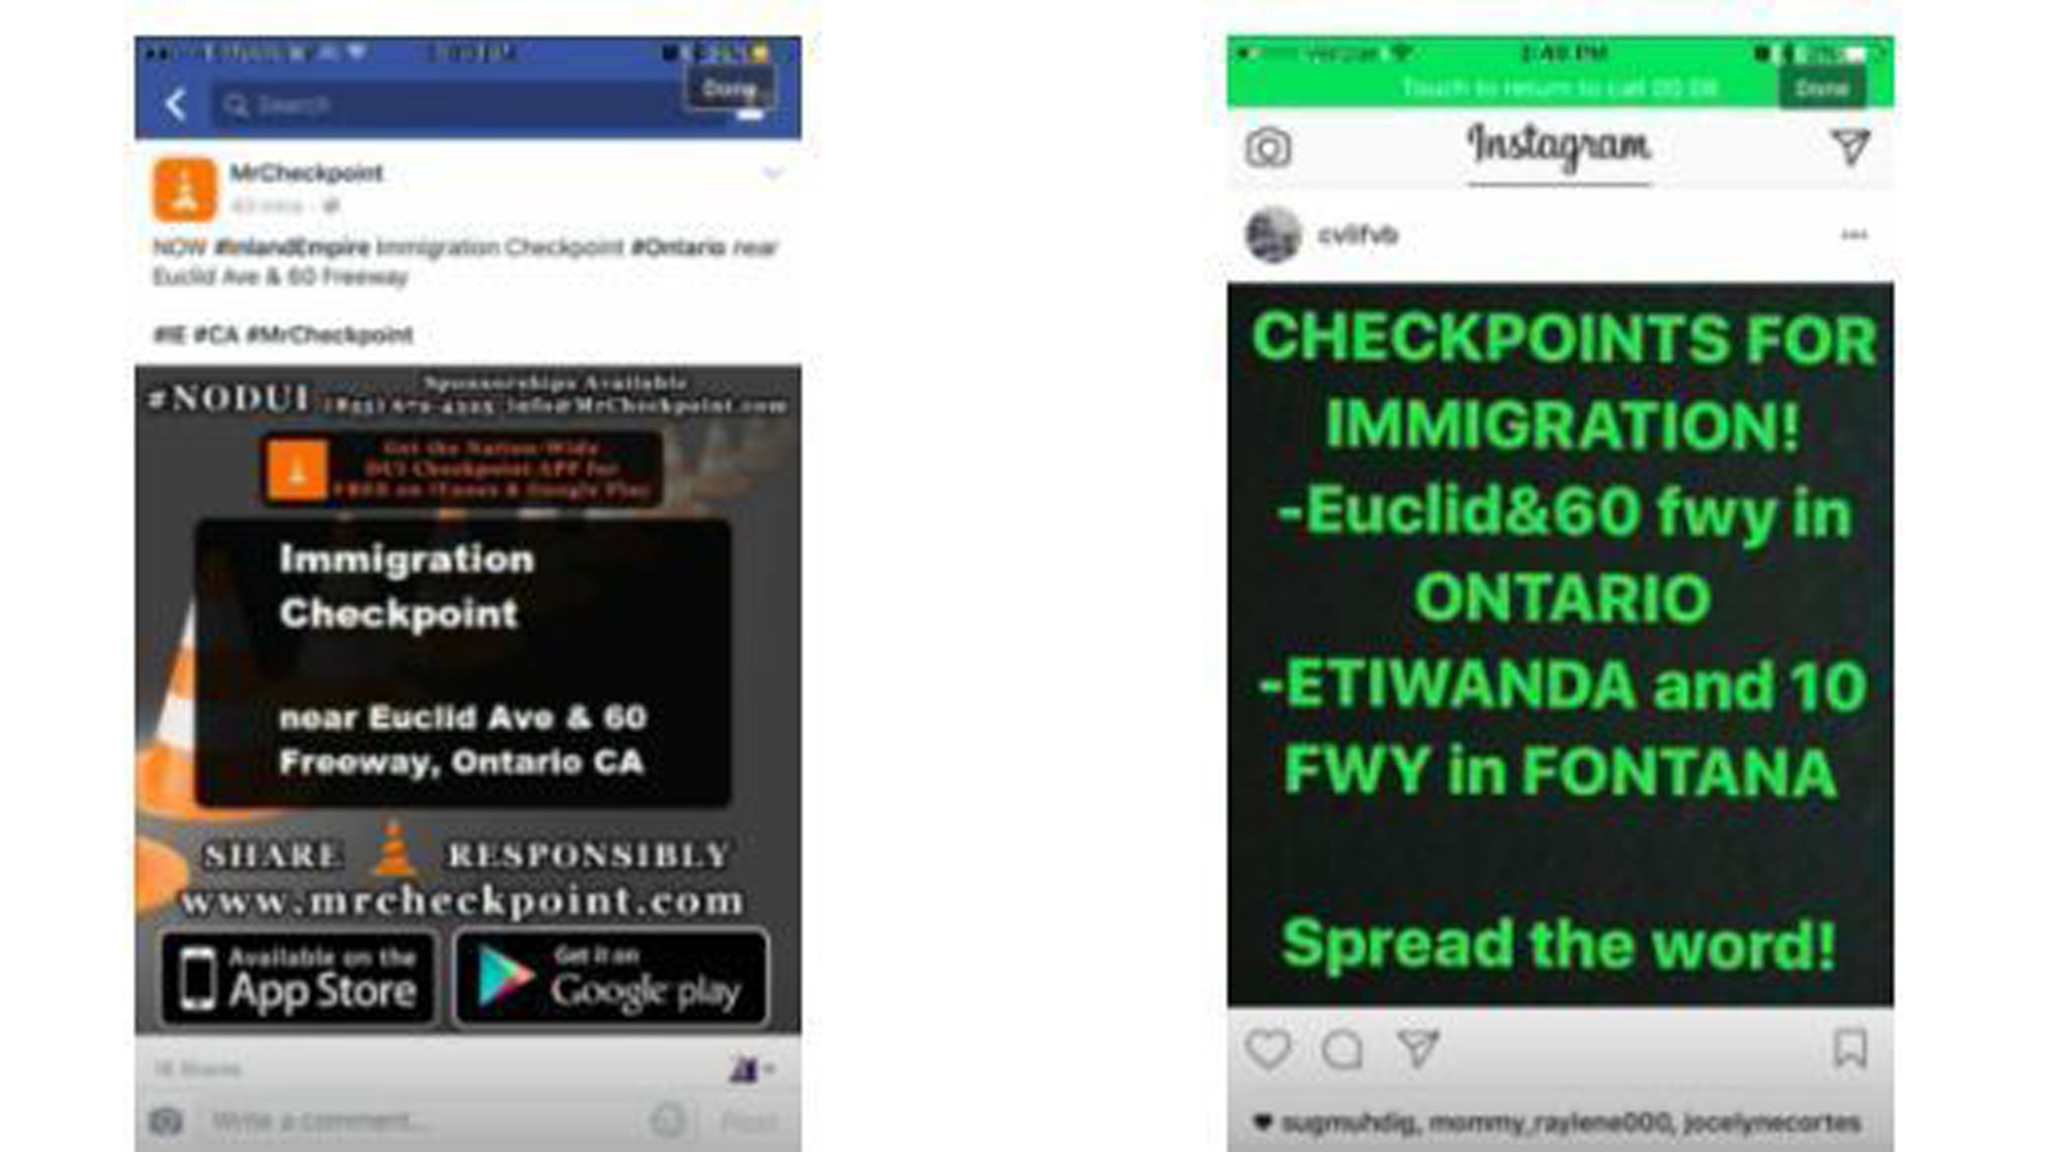 Fake news: Social media reports of deportation checkpoints false, designed to cause panic, authorities say - Los Angeles Times